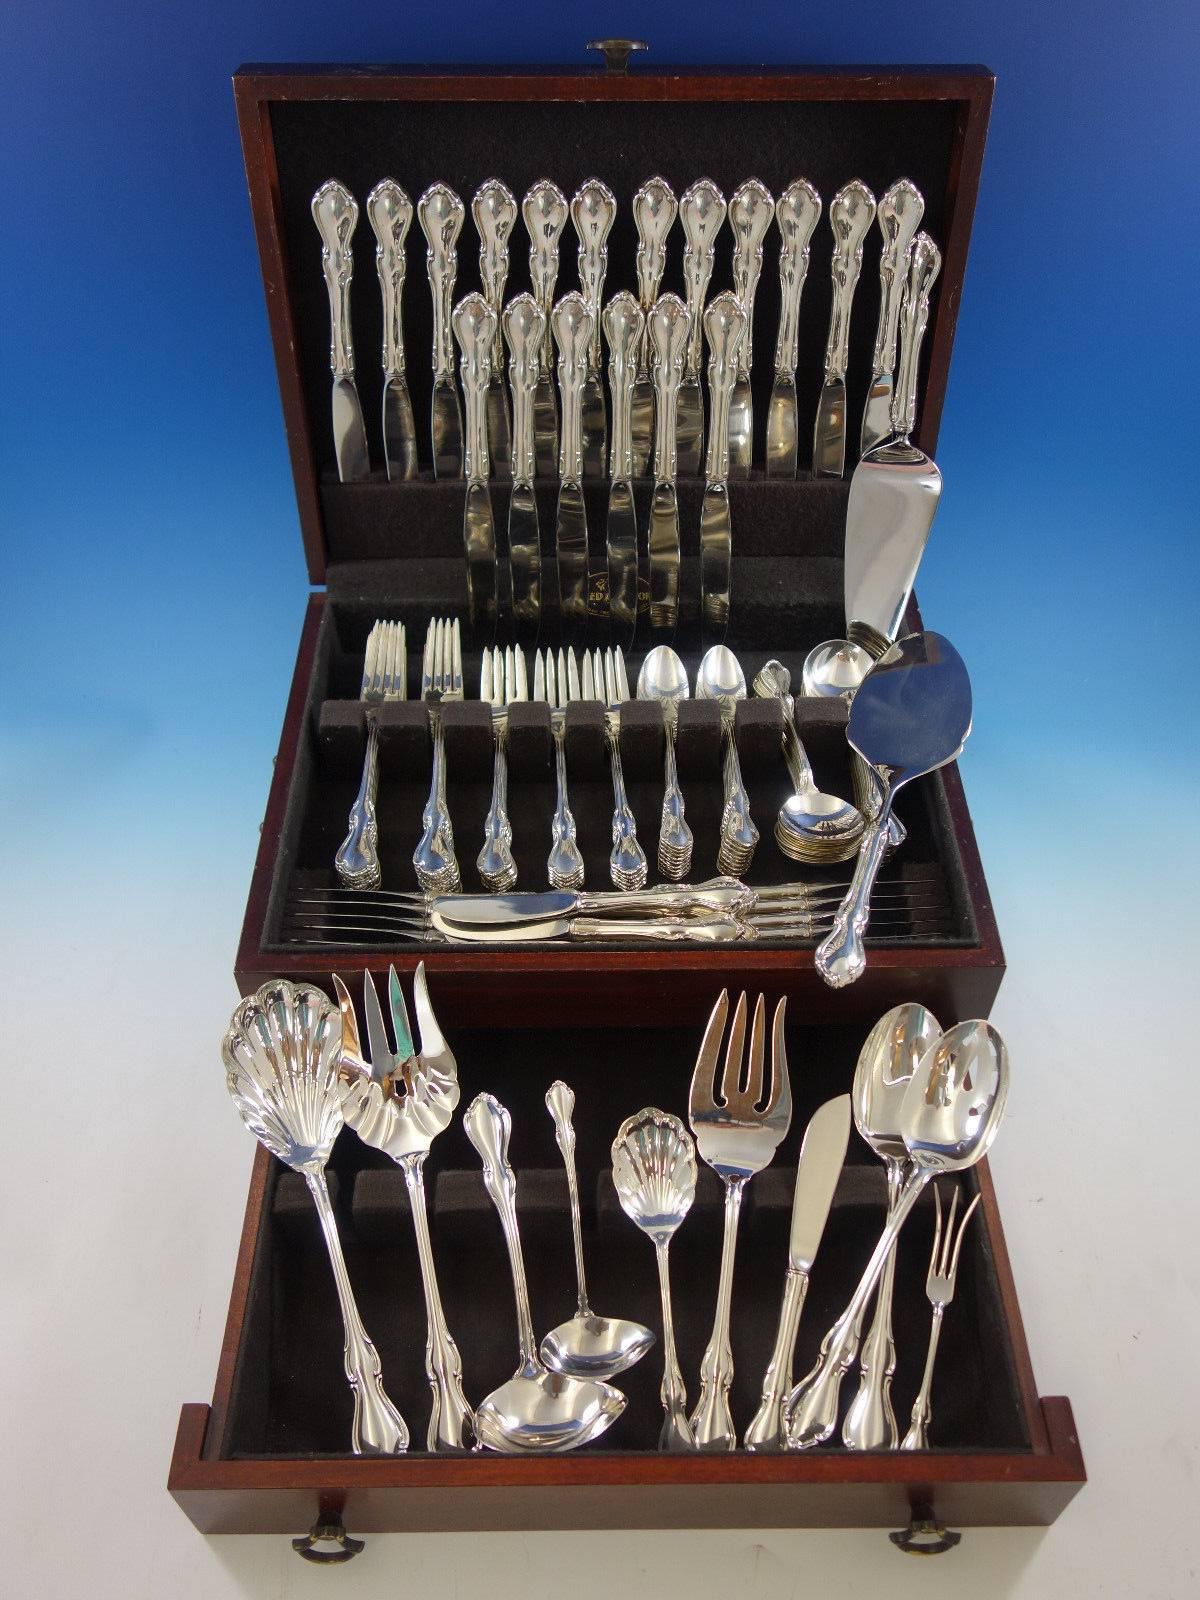 Hampton court by reed and Barton sterling silver flatware set - 120 pieces. This set includes: 18 knives, 9 1/8", 18 forks, 7 1/2", 18 salad forks, 6 5/8", 18 teaspoons, 6", 18 cream soup spoons, 6", 18 hollow handle butter